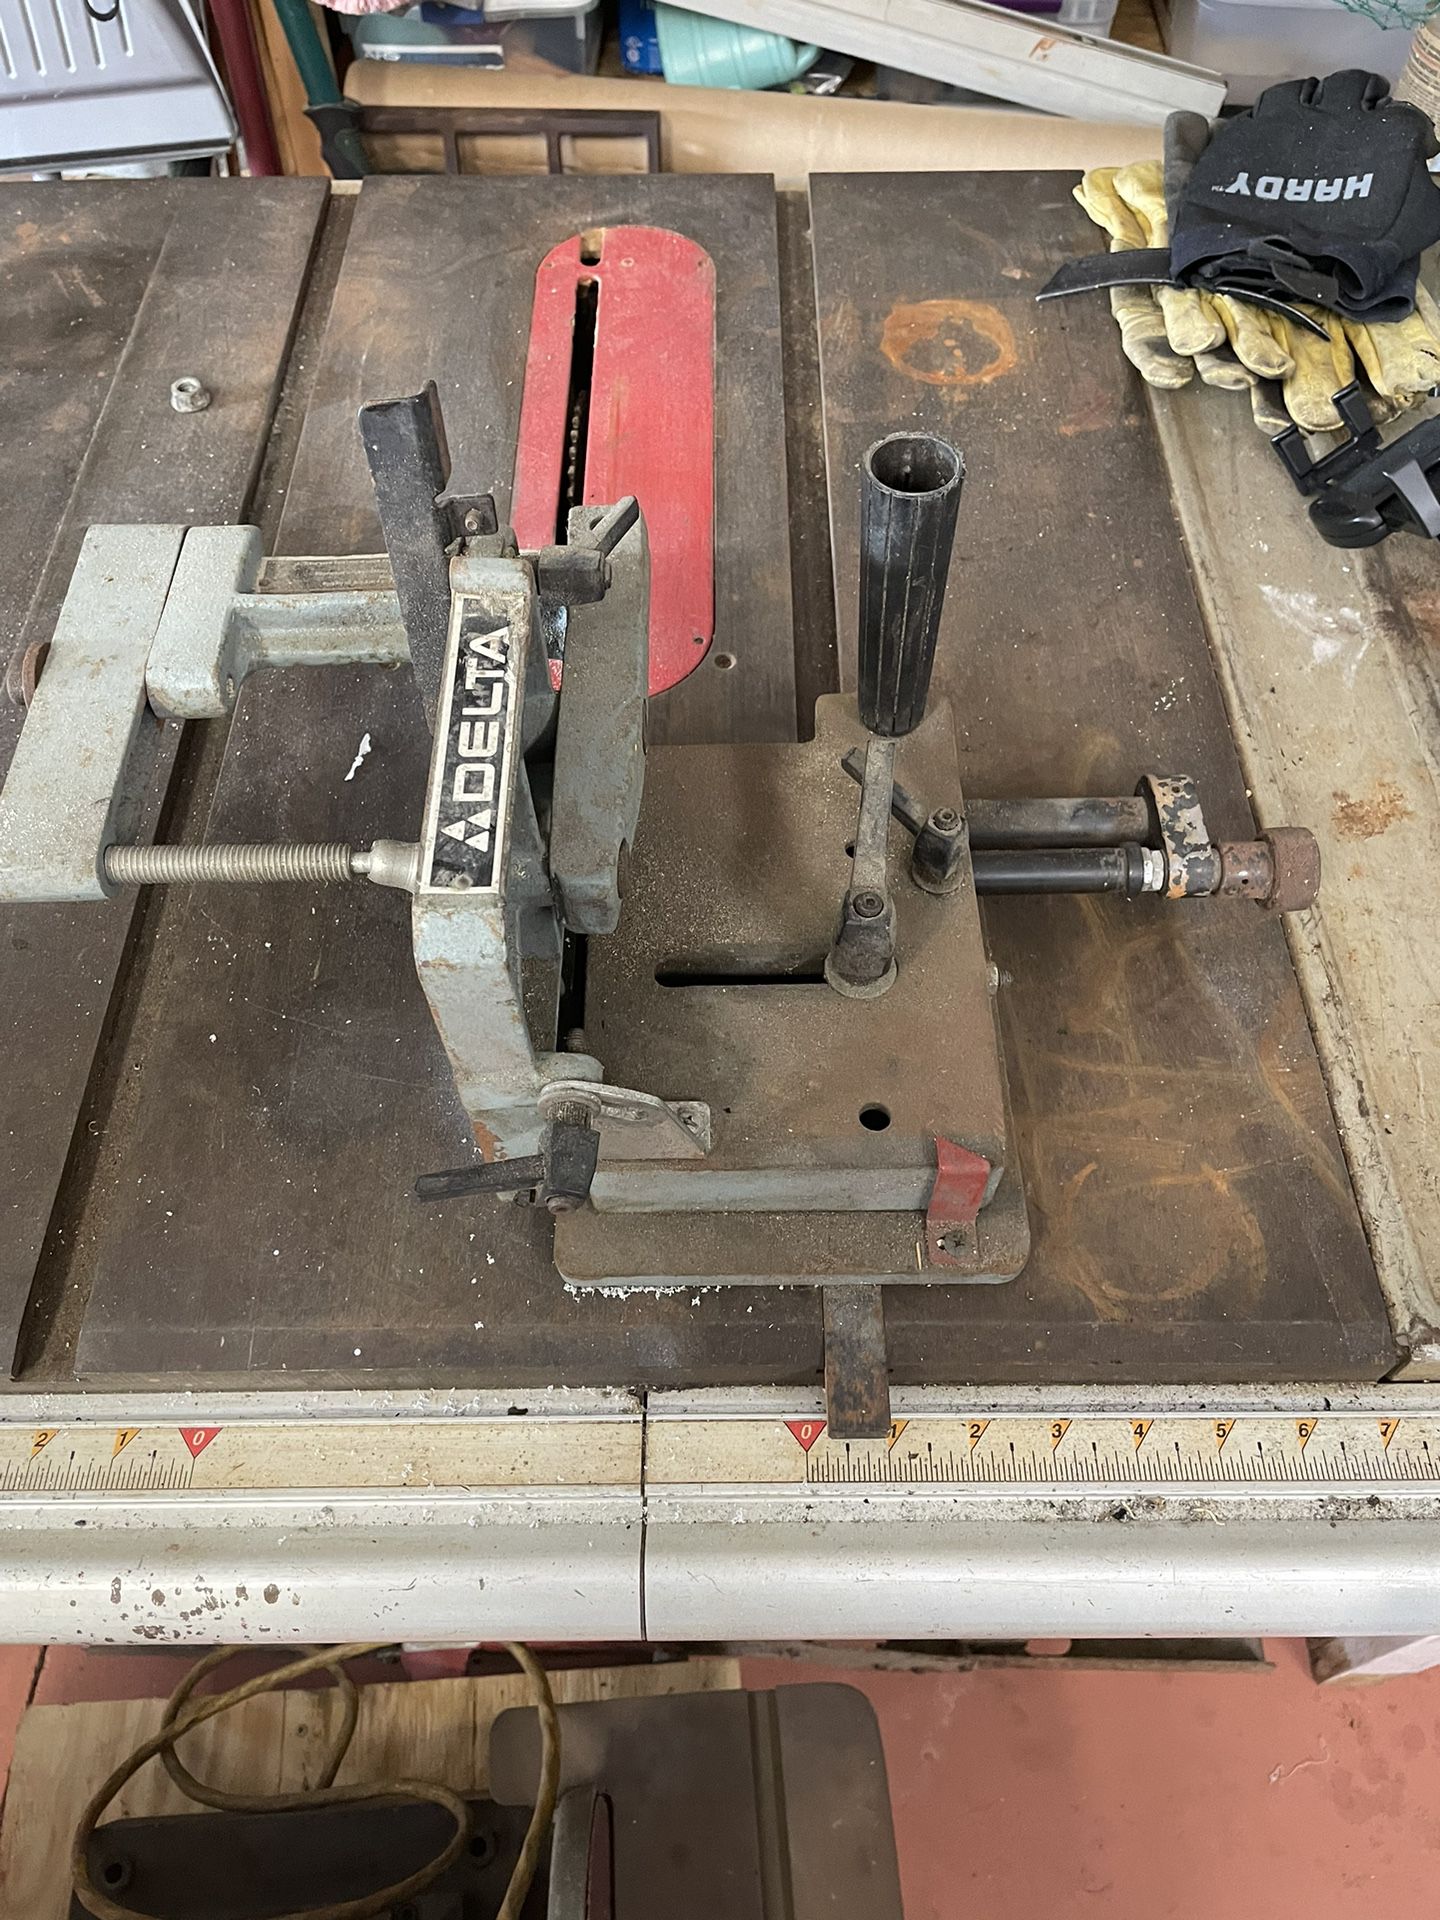 Delta Table Saw Jig 